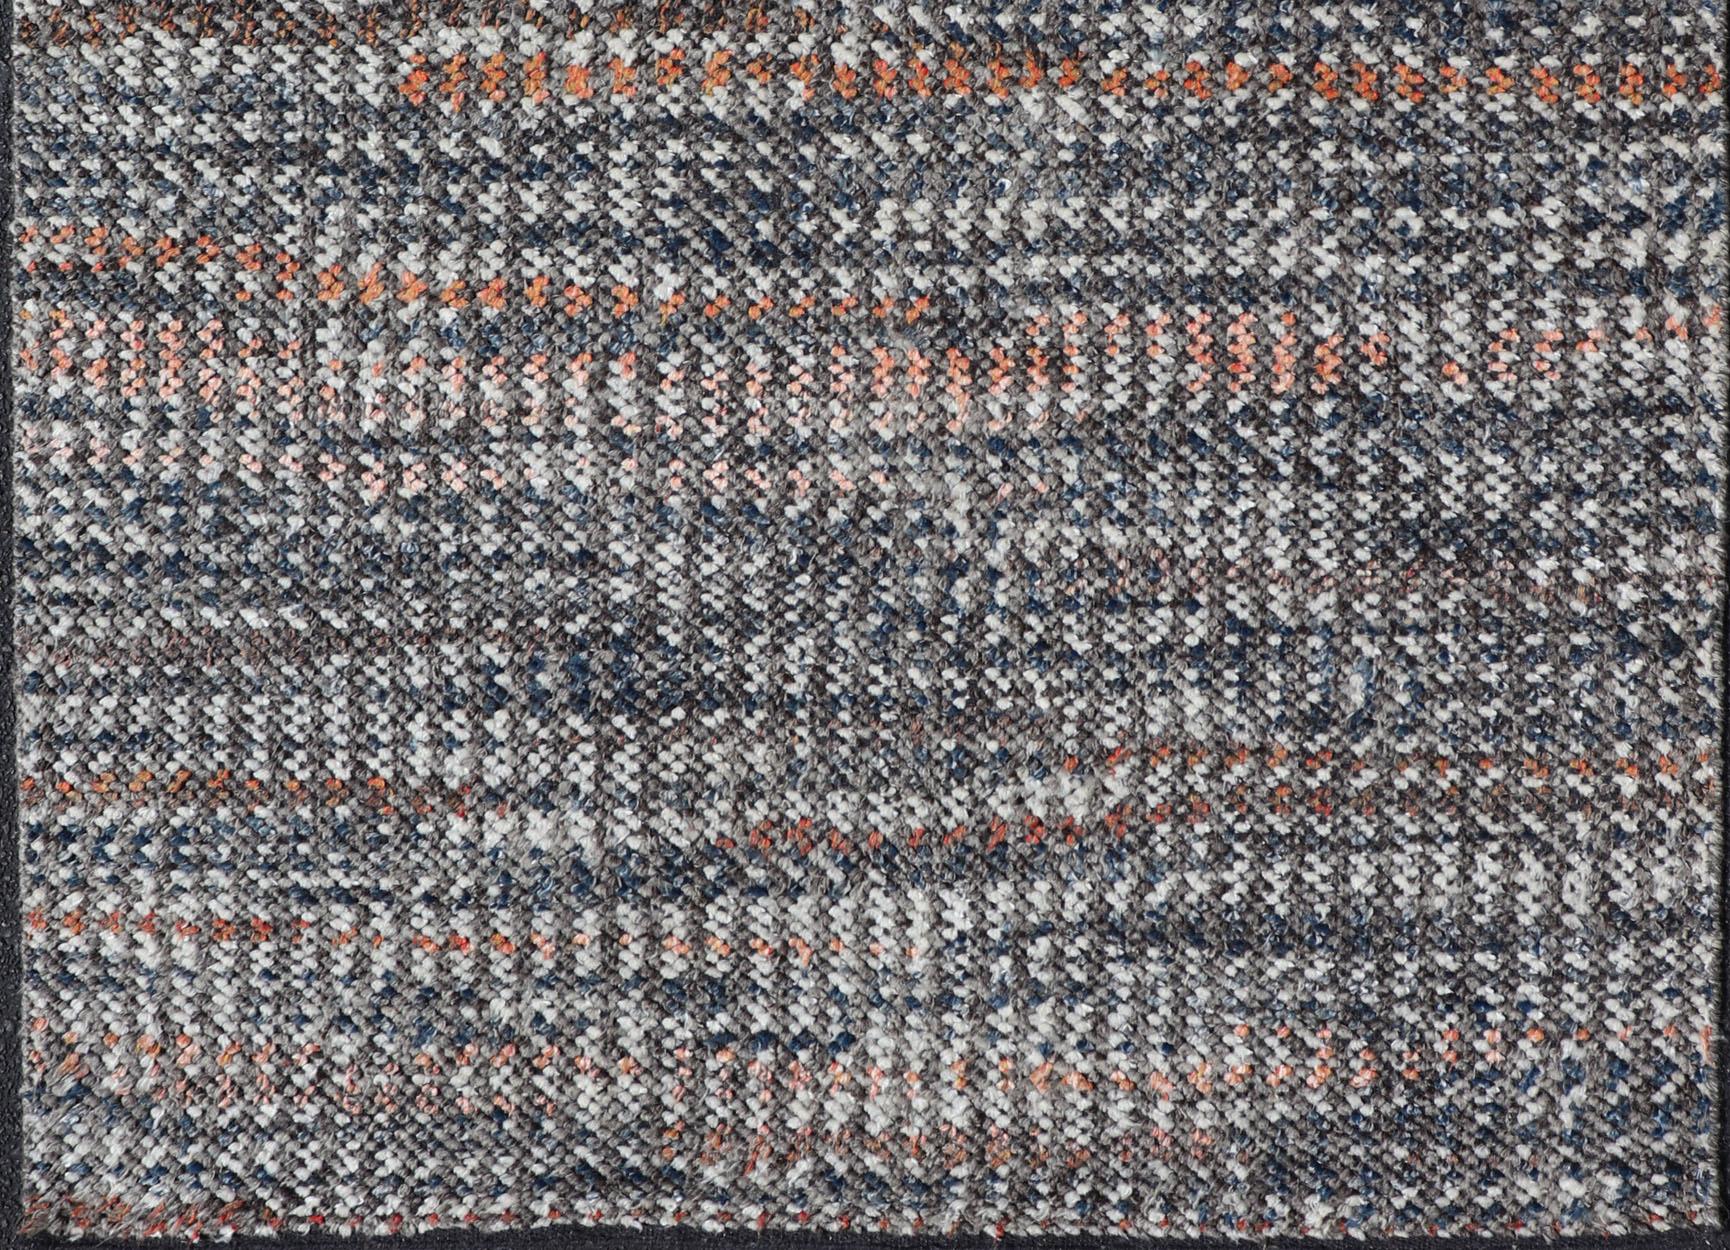 Measures 4'8 x 9'11 

This interesting piece features a dark ebony field, beautifully blended with orange, red, gray and cream. Like many modern rugs, this piece does not have a border. The carpet makers of this region boast their expertise with the